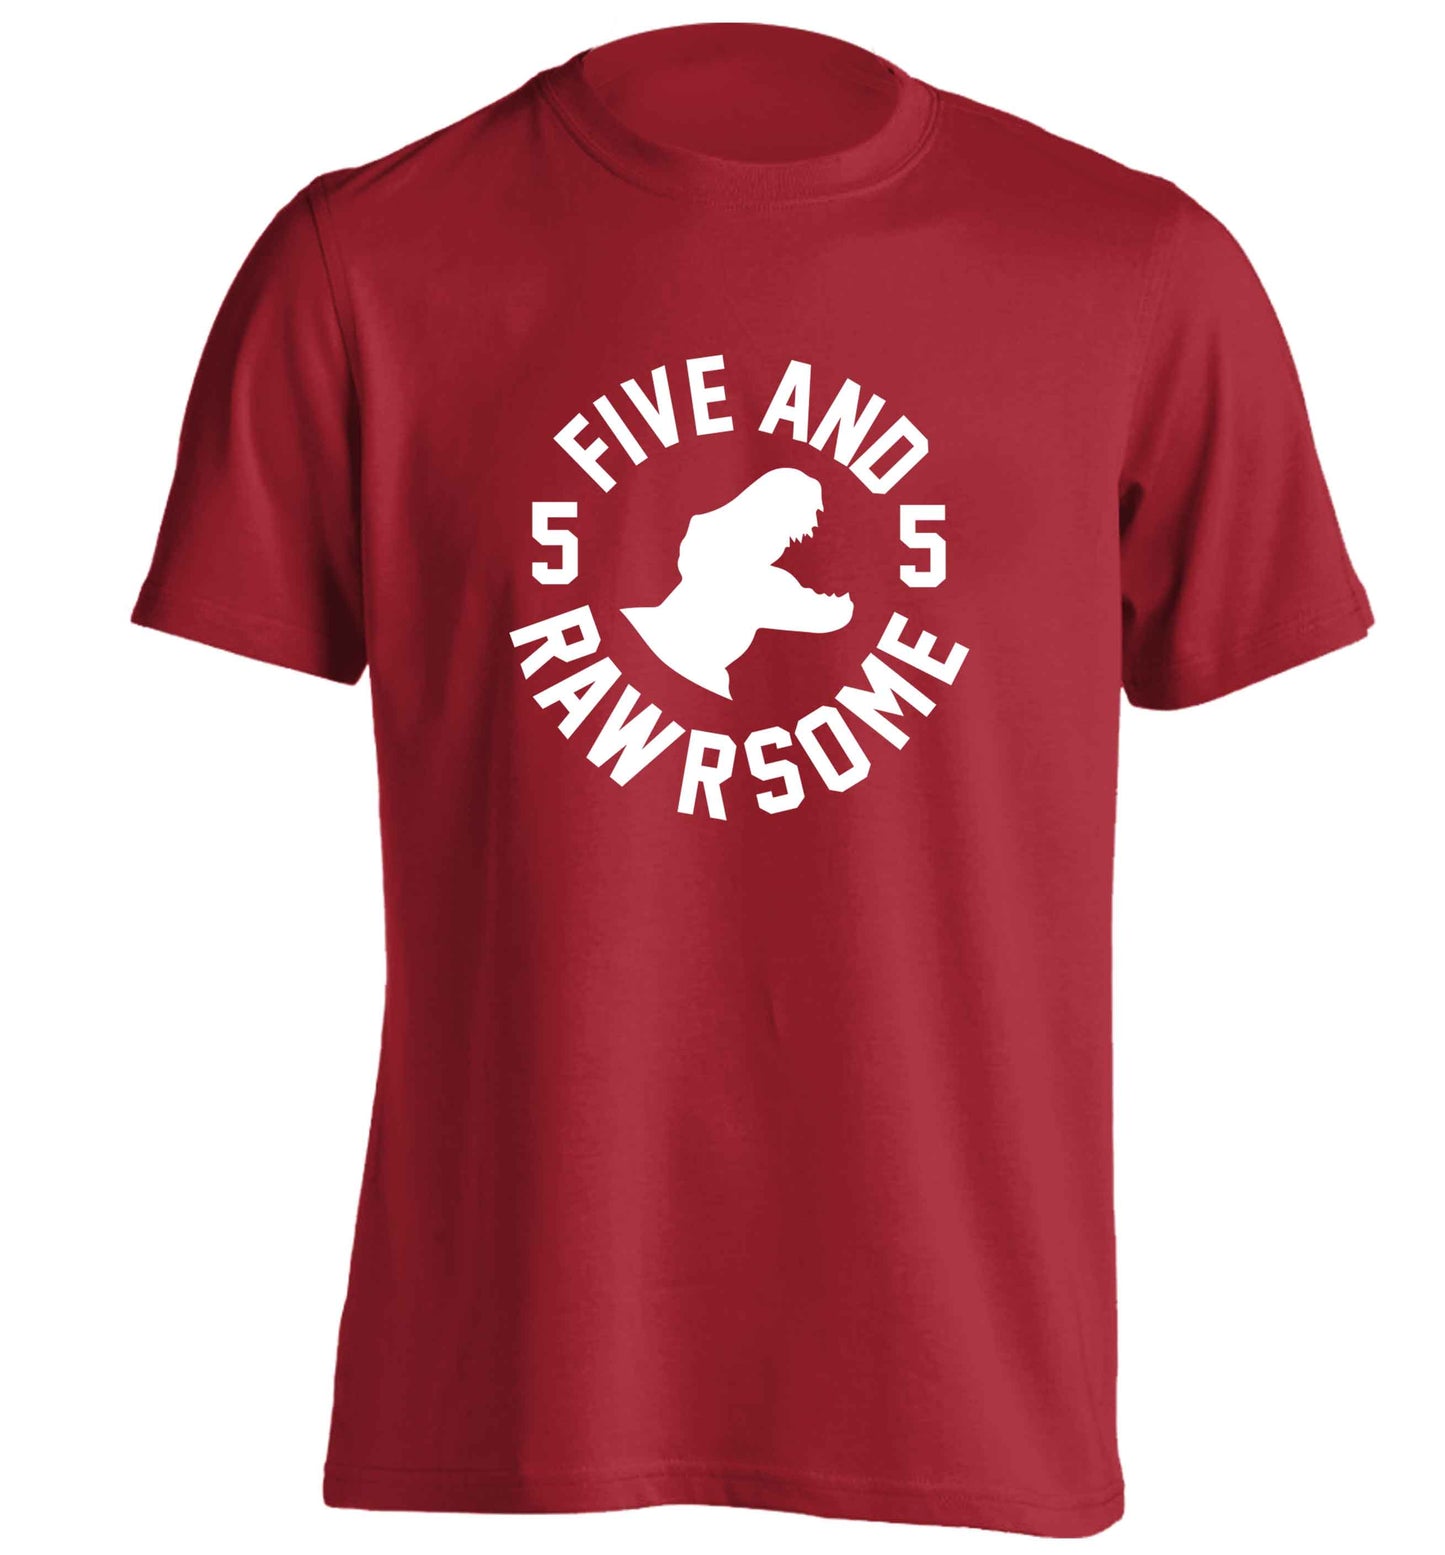 Five and rawrsome adults unisex red Tshirt 2XL